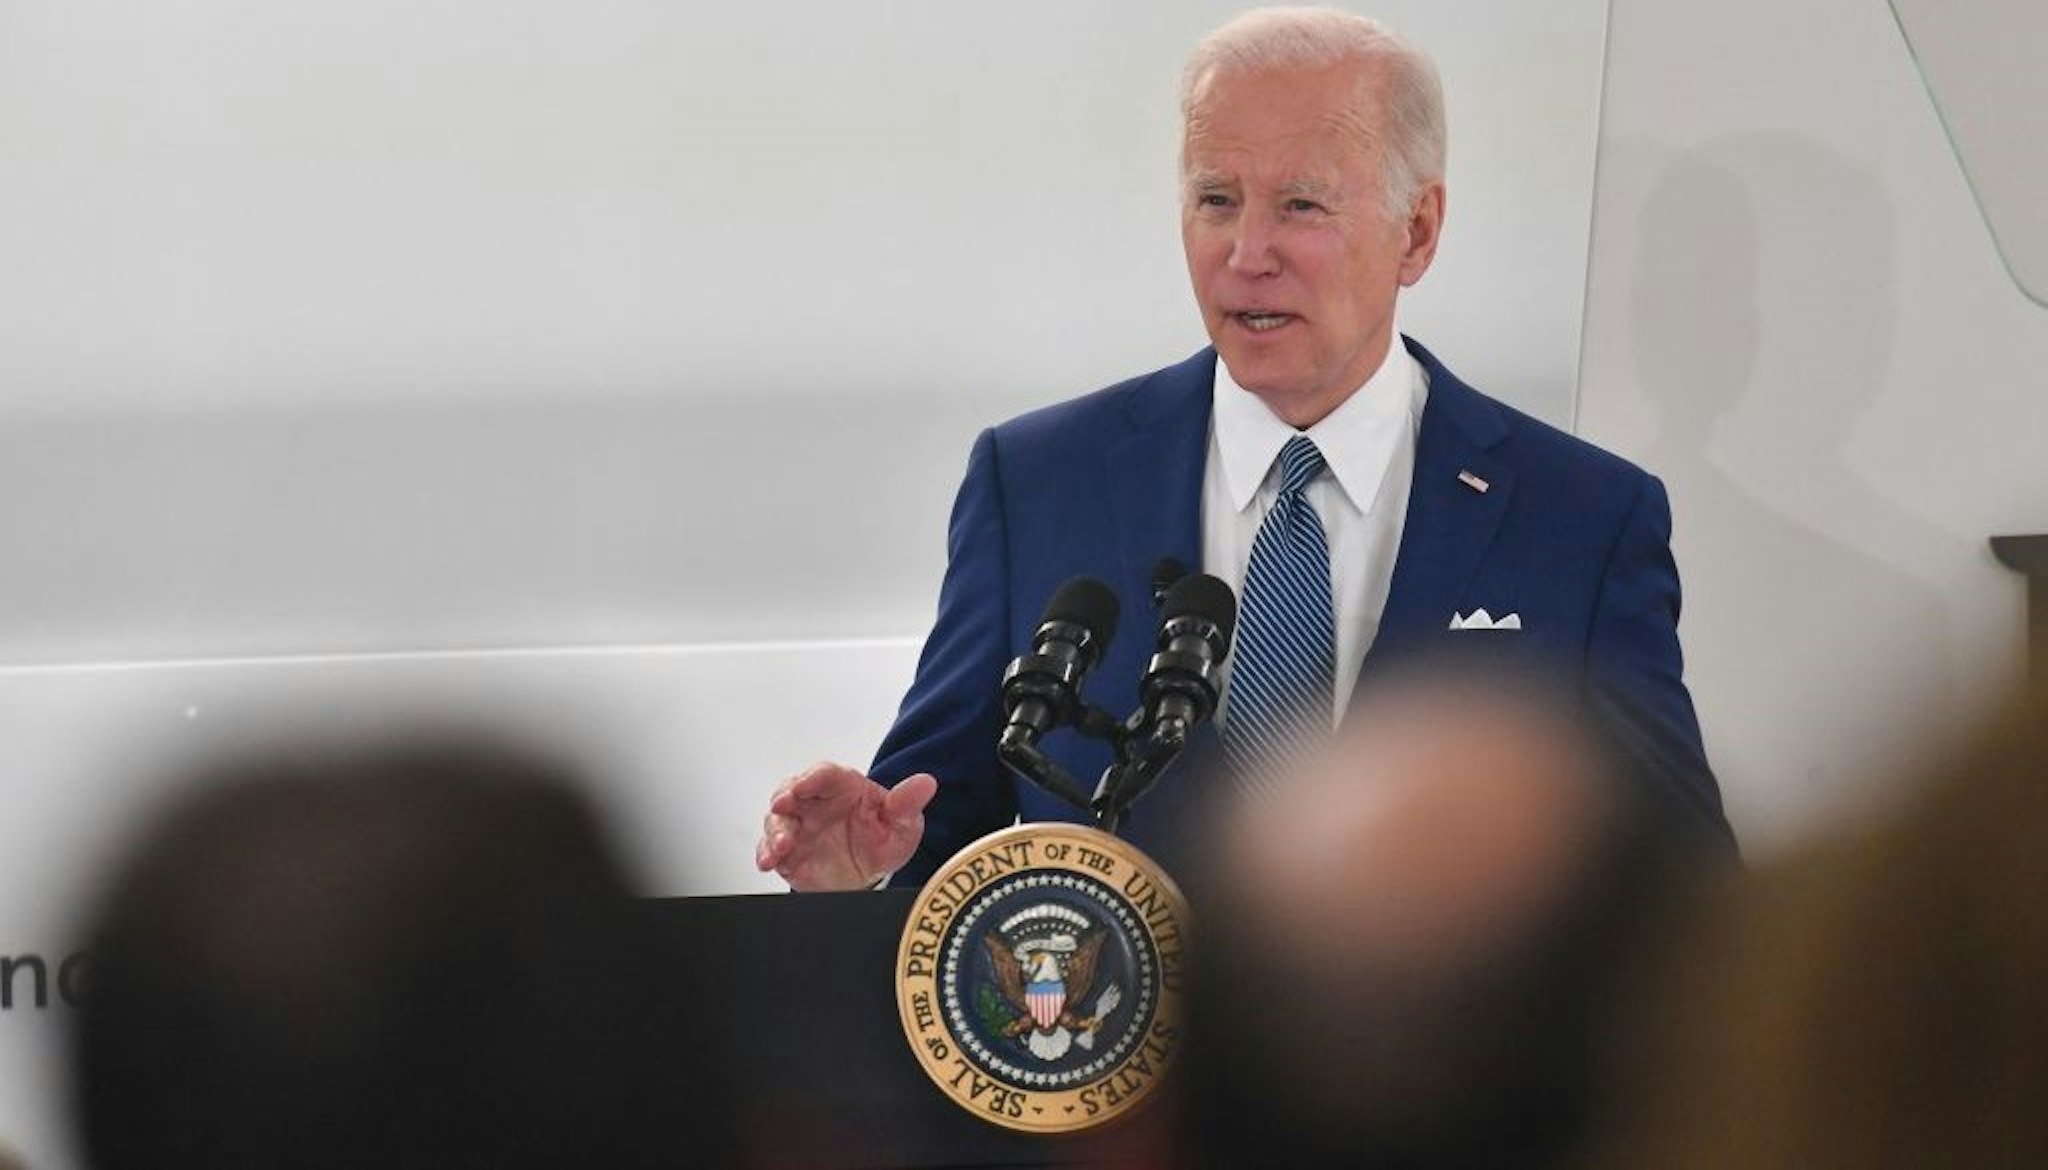 US President Joe Biden delivers remarks at the Business Roundtables CEO Quarterly Meeting in Washington, DC, March 21, 2022.